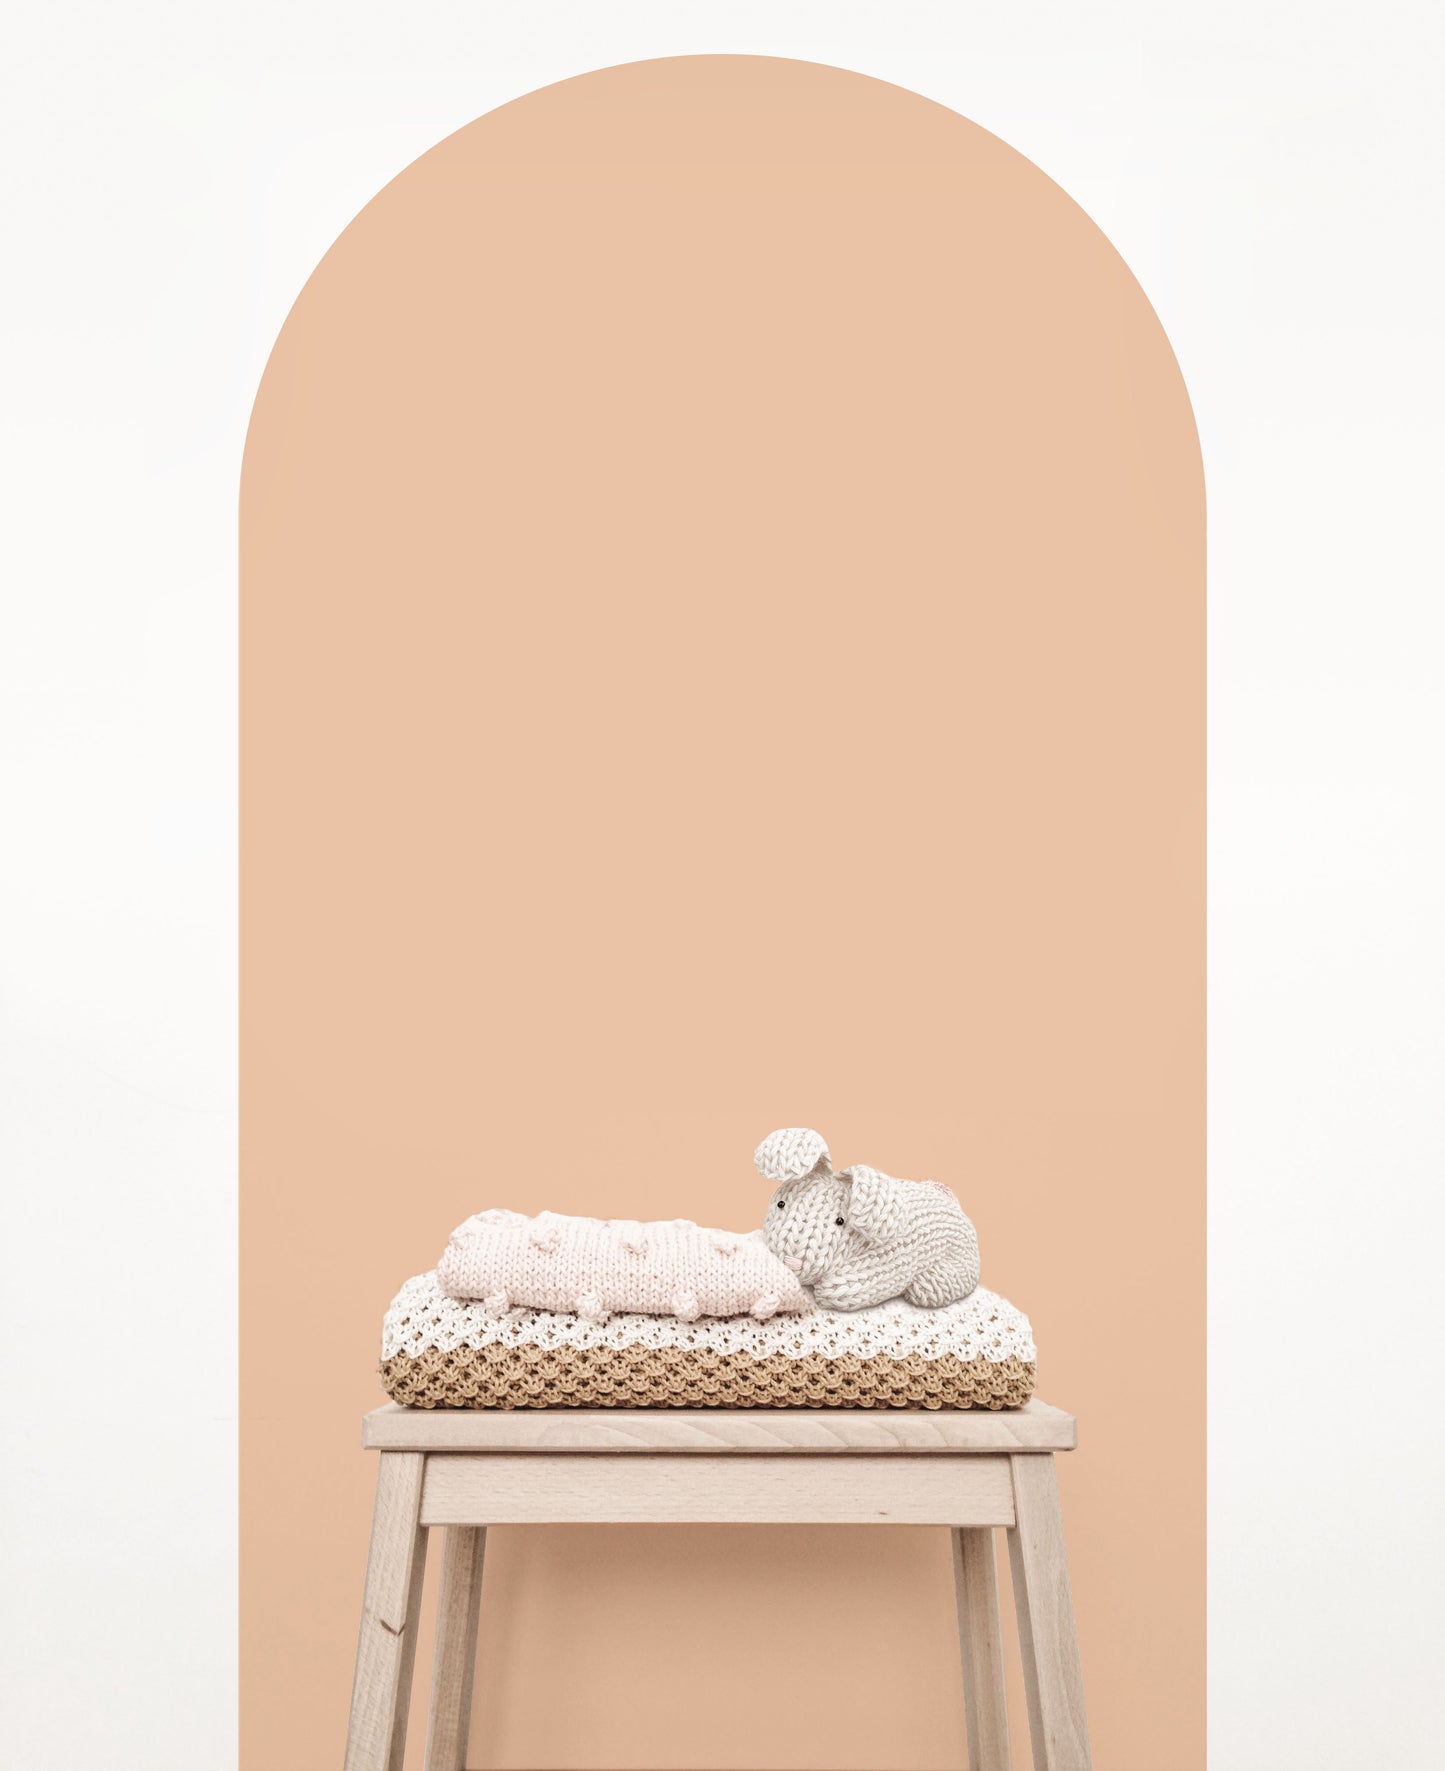 Arch Wall Decals - Peach - Wall Decals Australia - Fable and Fawn 